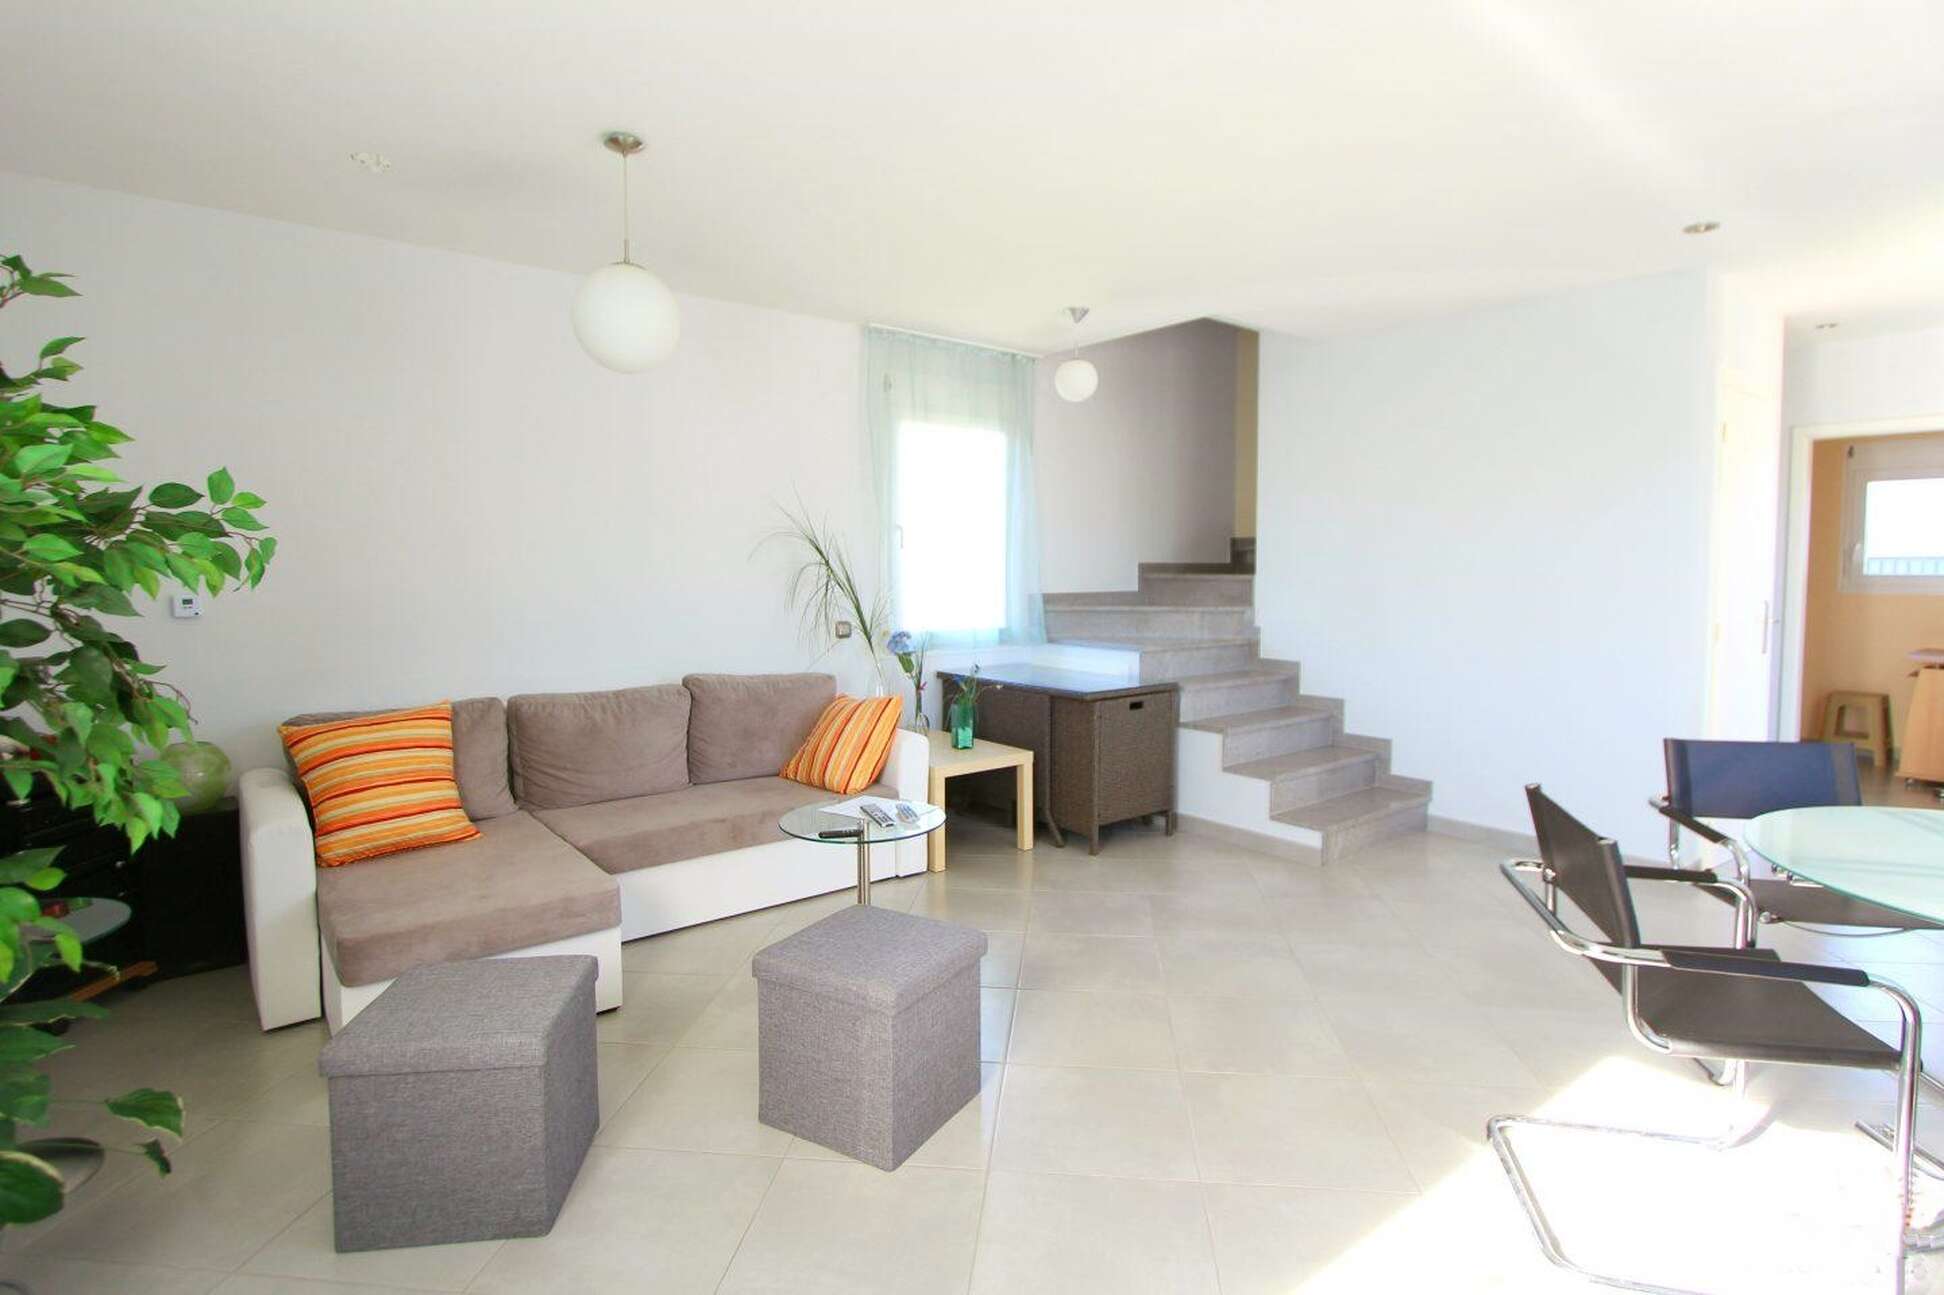 Renovated house with a studio for sale in Empuriabrava